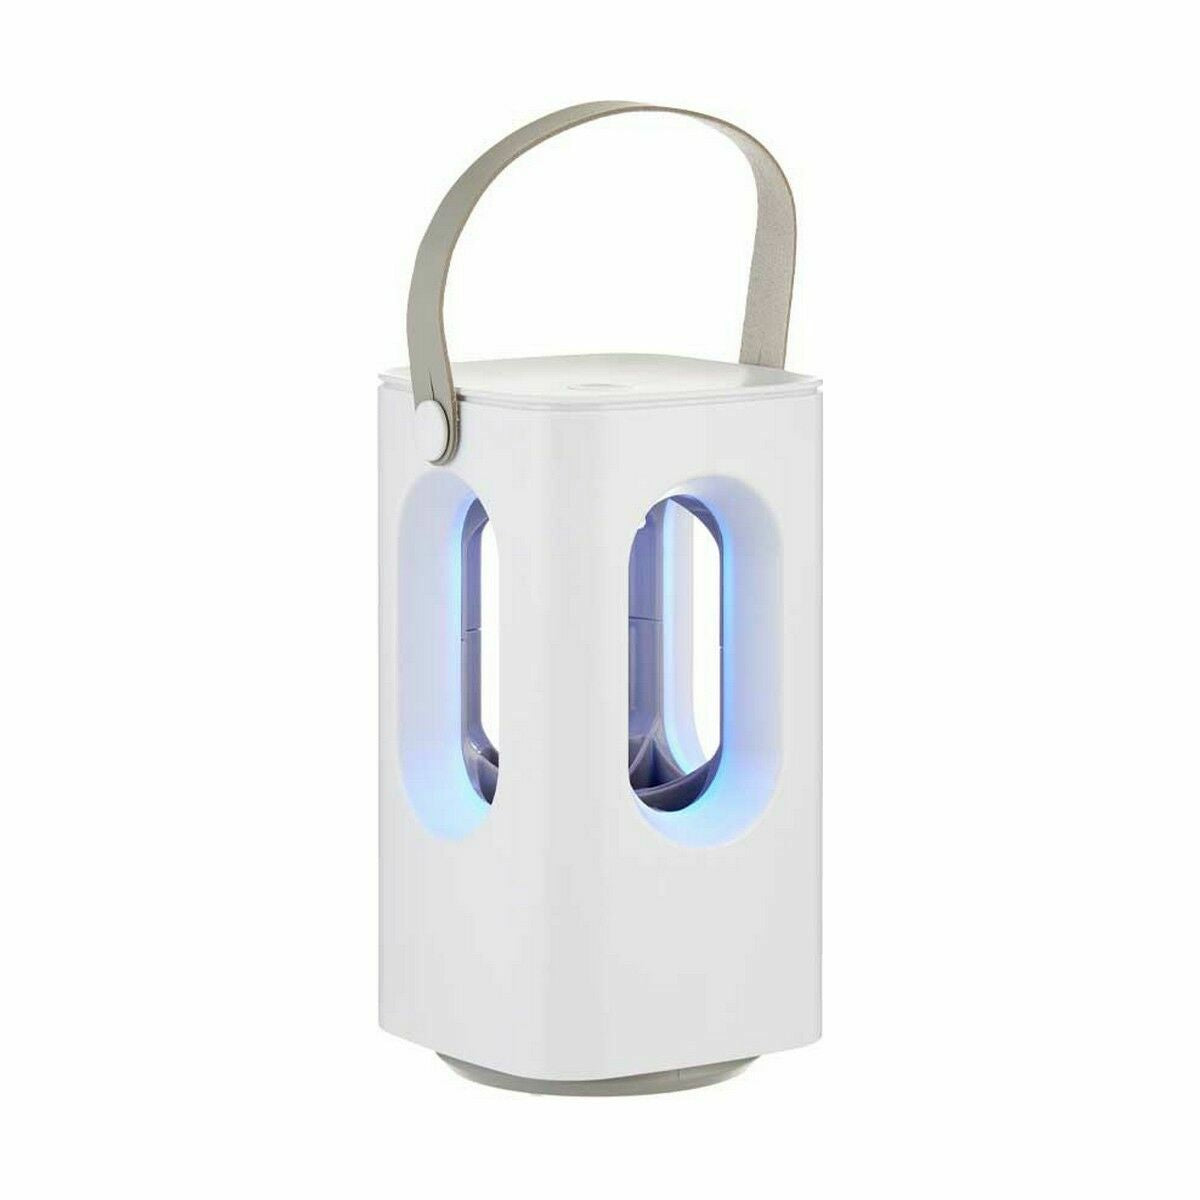 2-in-1 Rechargeable Mosquito Repellent Lamp with LED White ABS (6 Units)